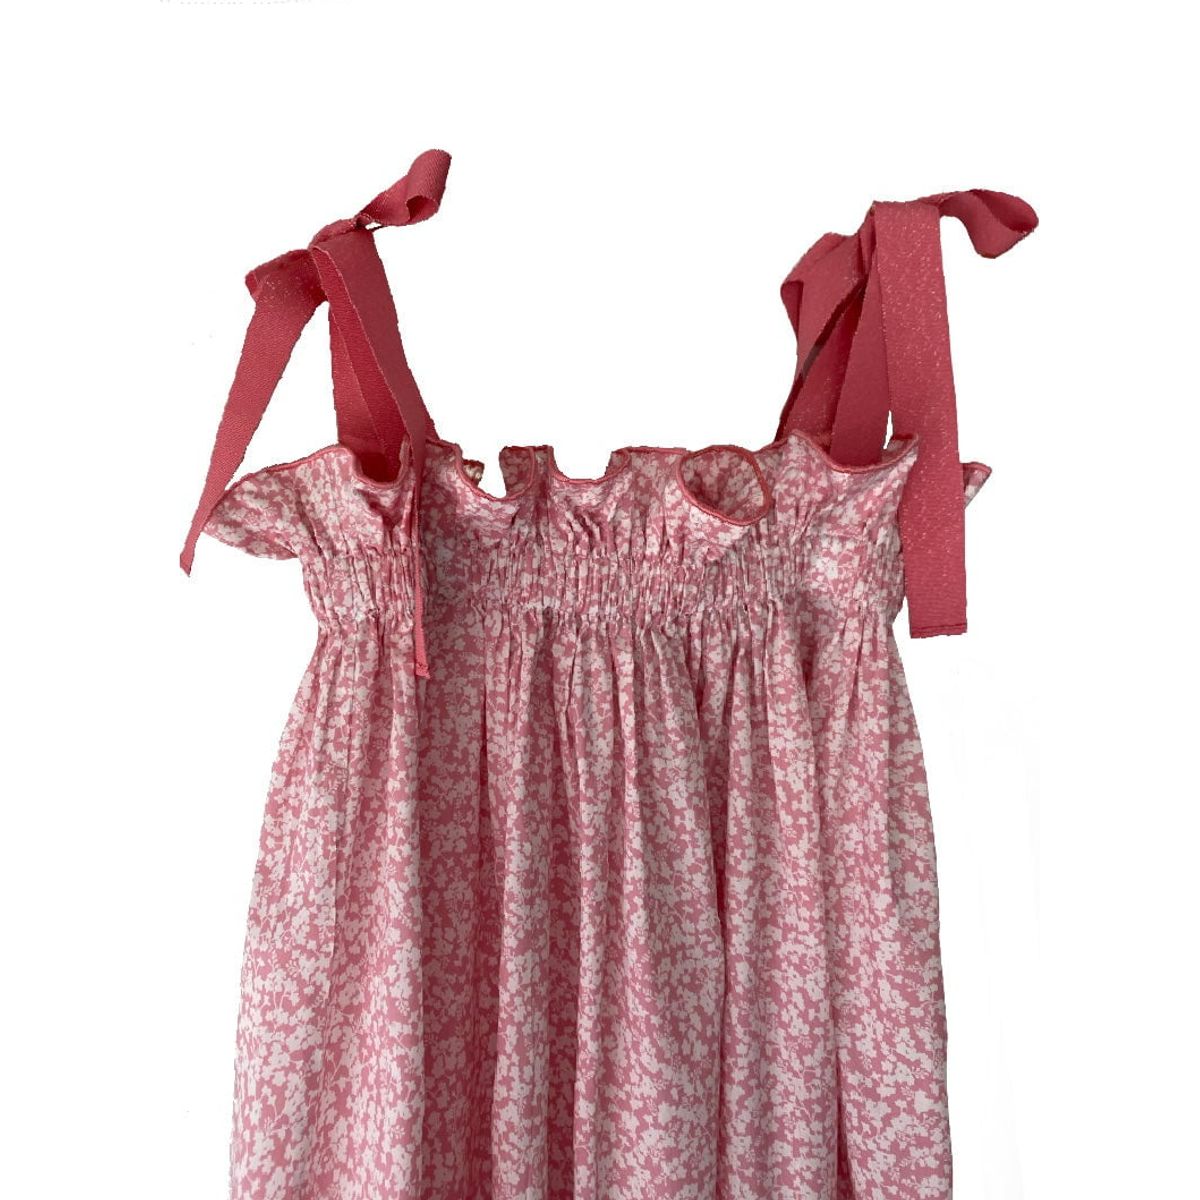 Girls' Jaime Dress in Pink & White Ditsy Floral by Casey Marks